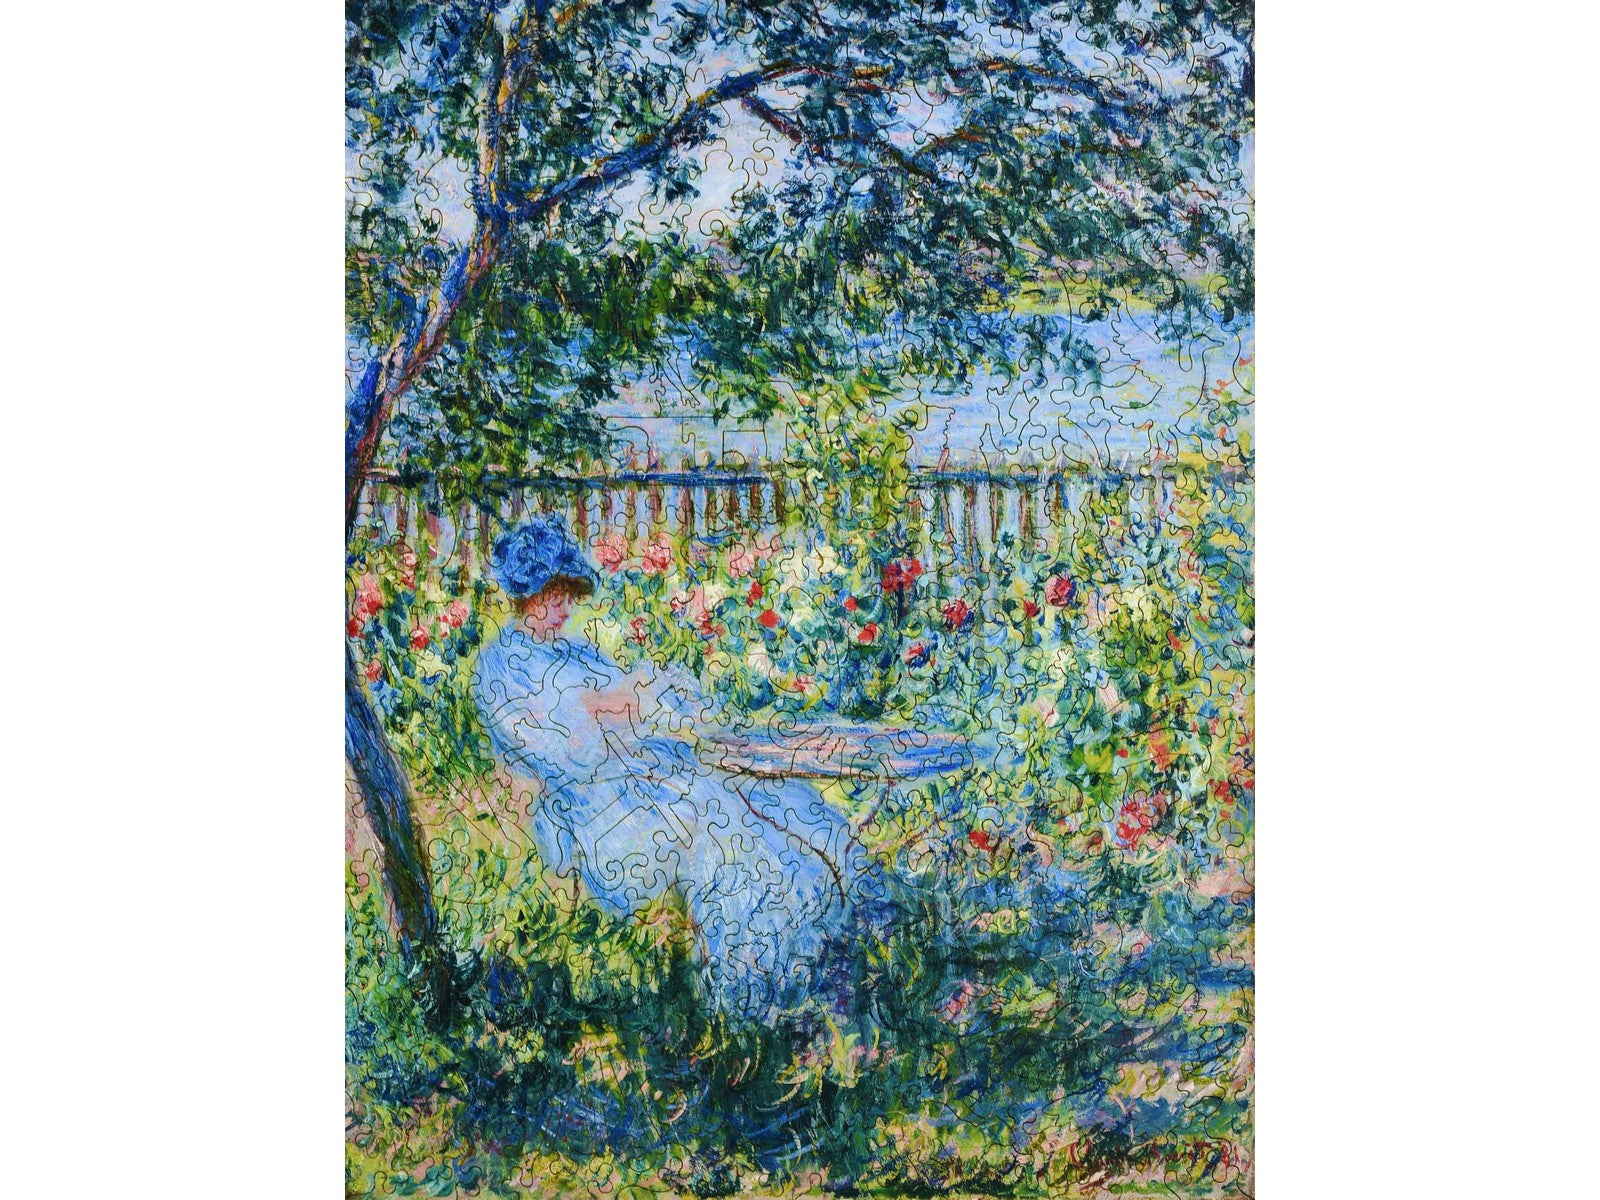 The front of the puzzle, La Terrasse, which shows a woman relaxing in a chair underneath a tree.